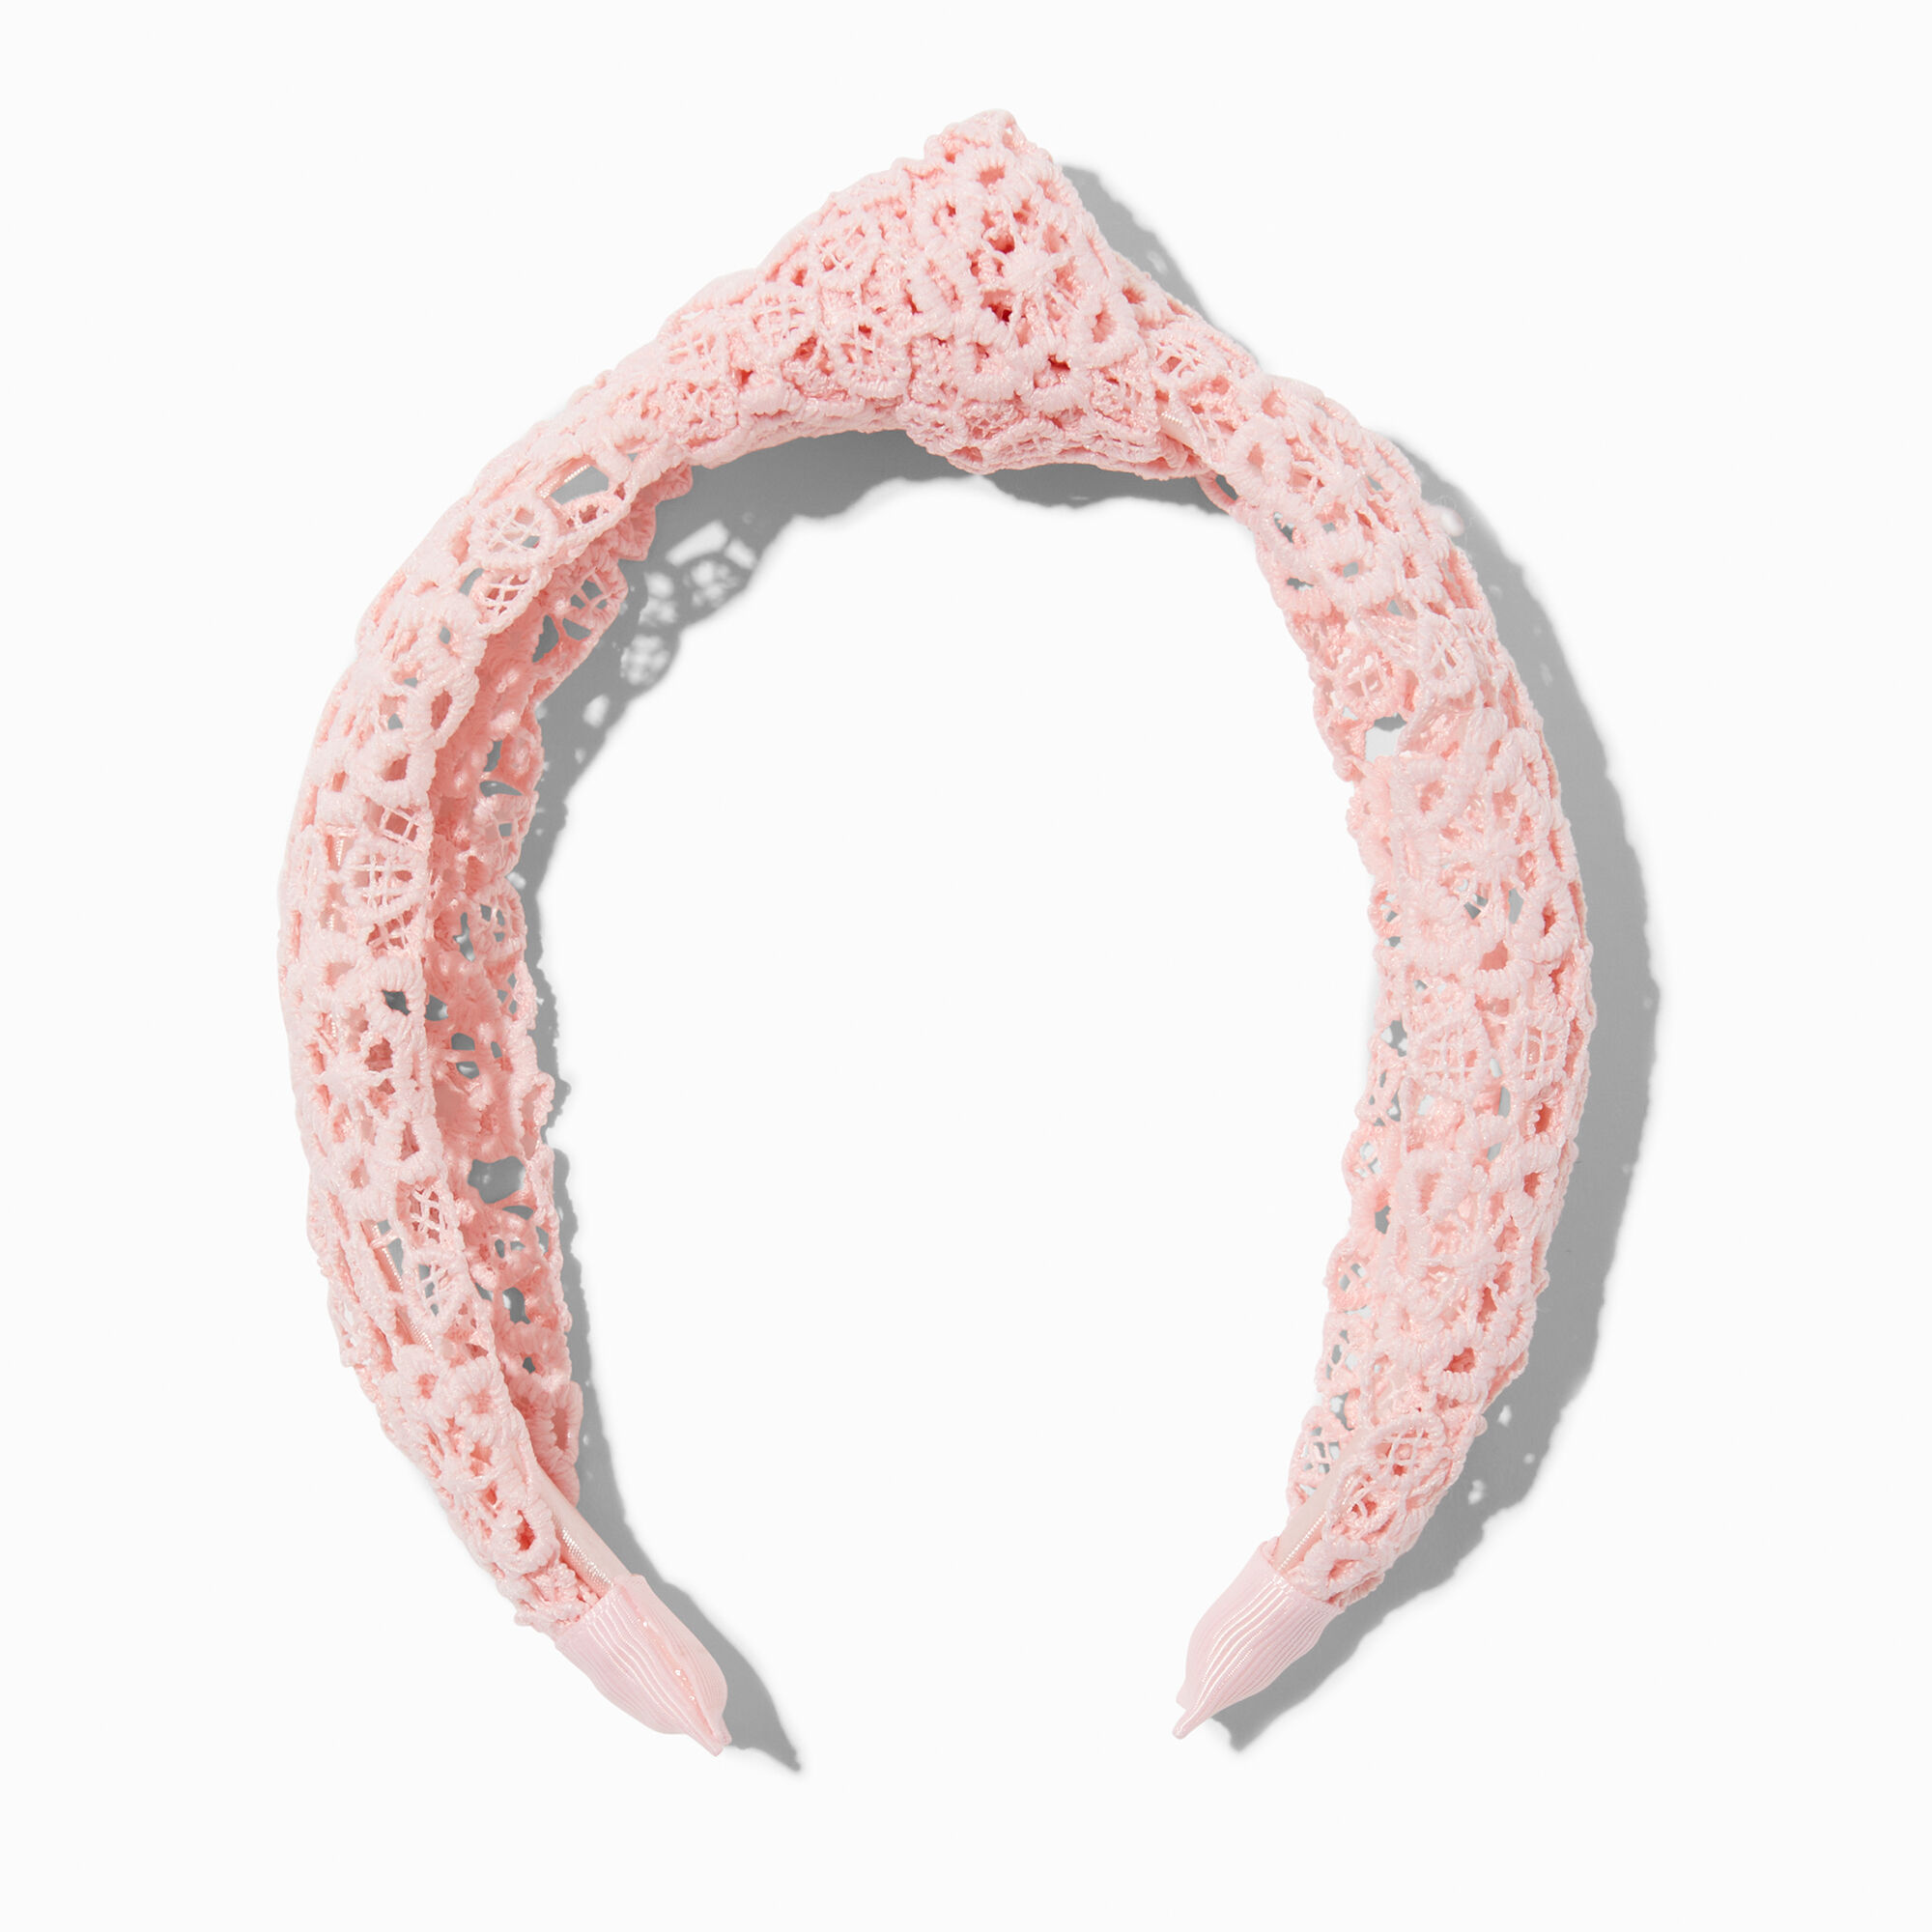 View Claires Eyelet Knotted Headband Pink information